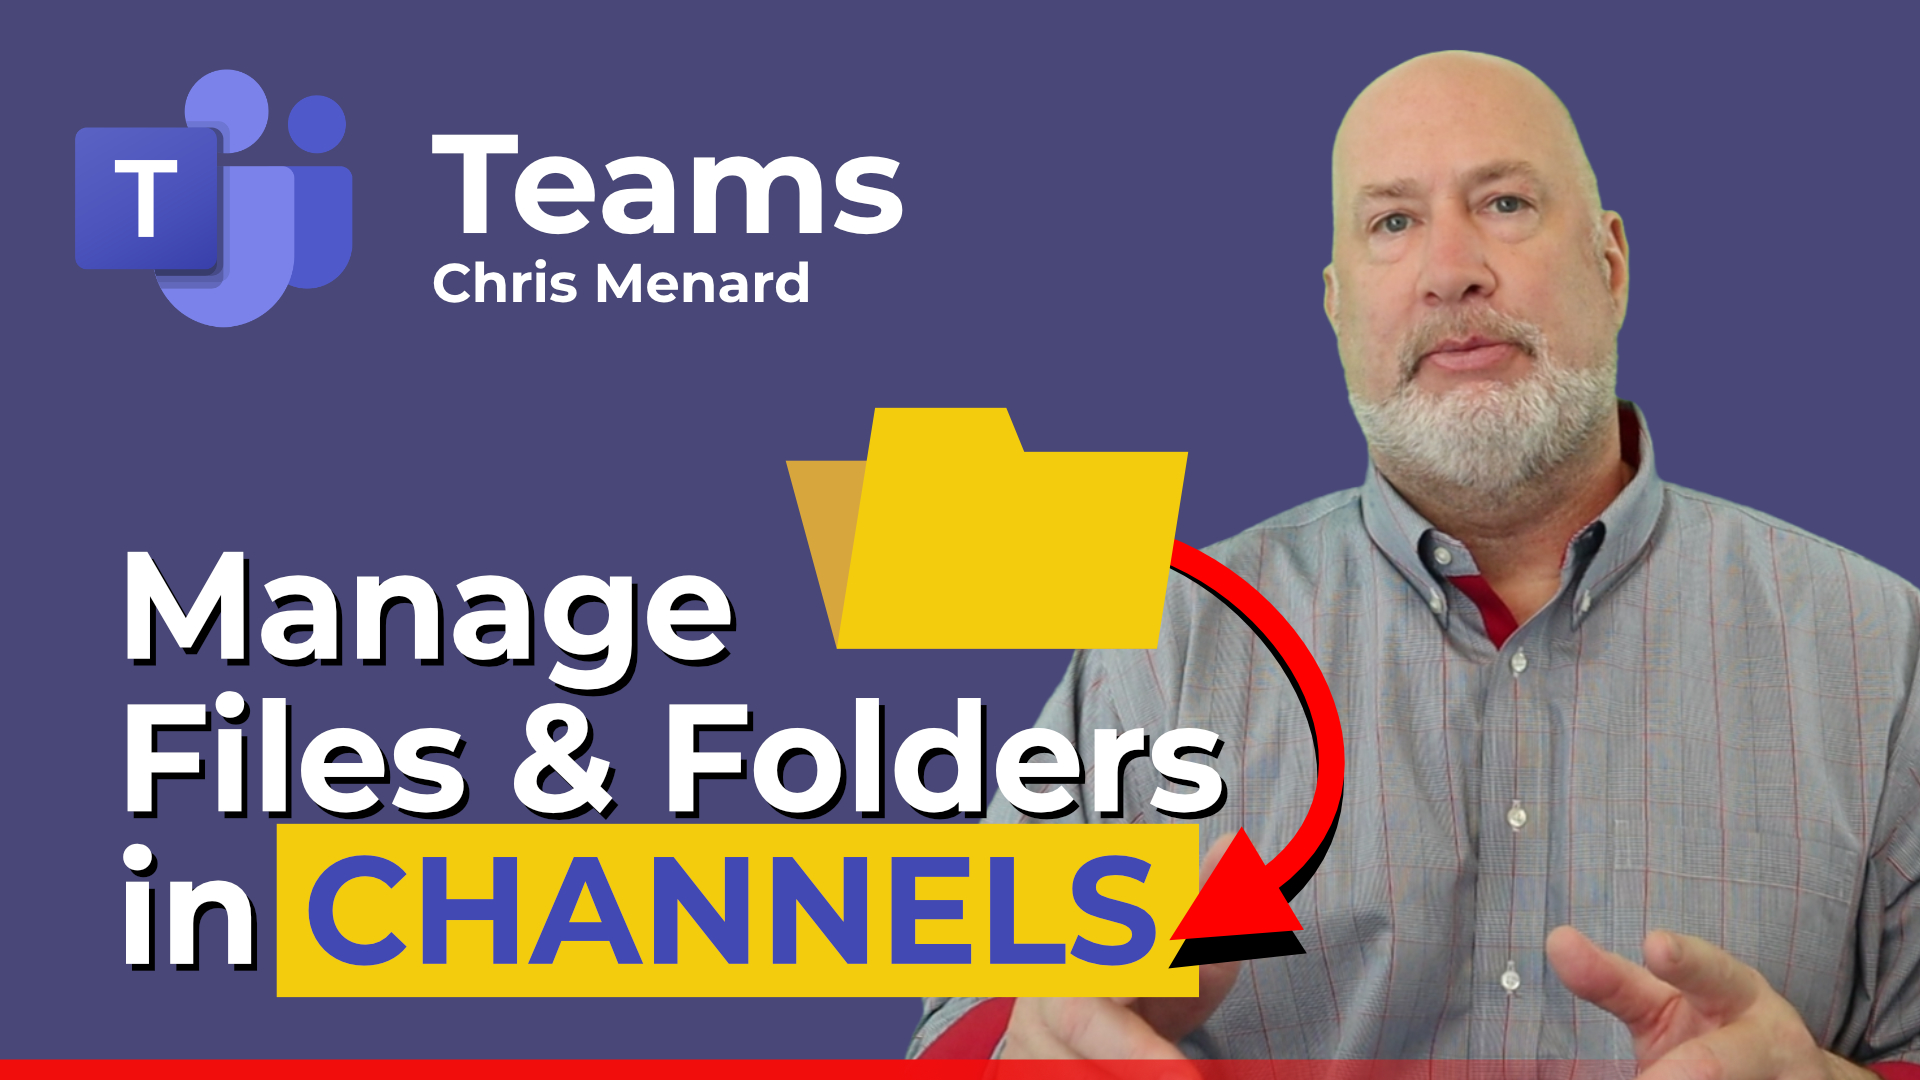 Teams - How to Manage Files and Folders in a Channel